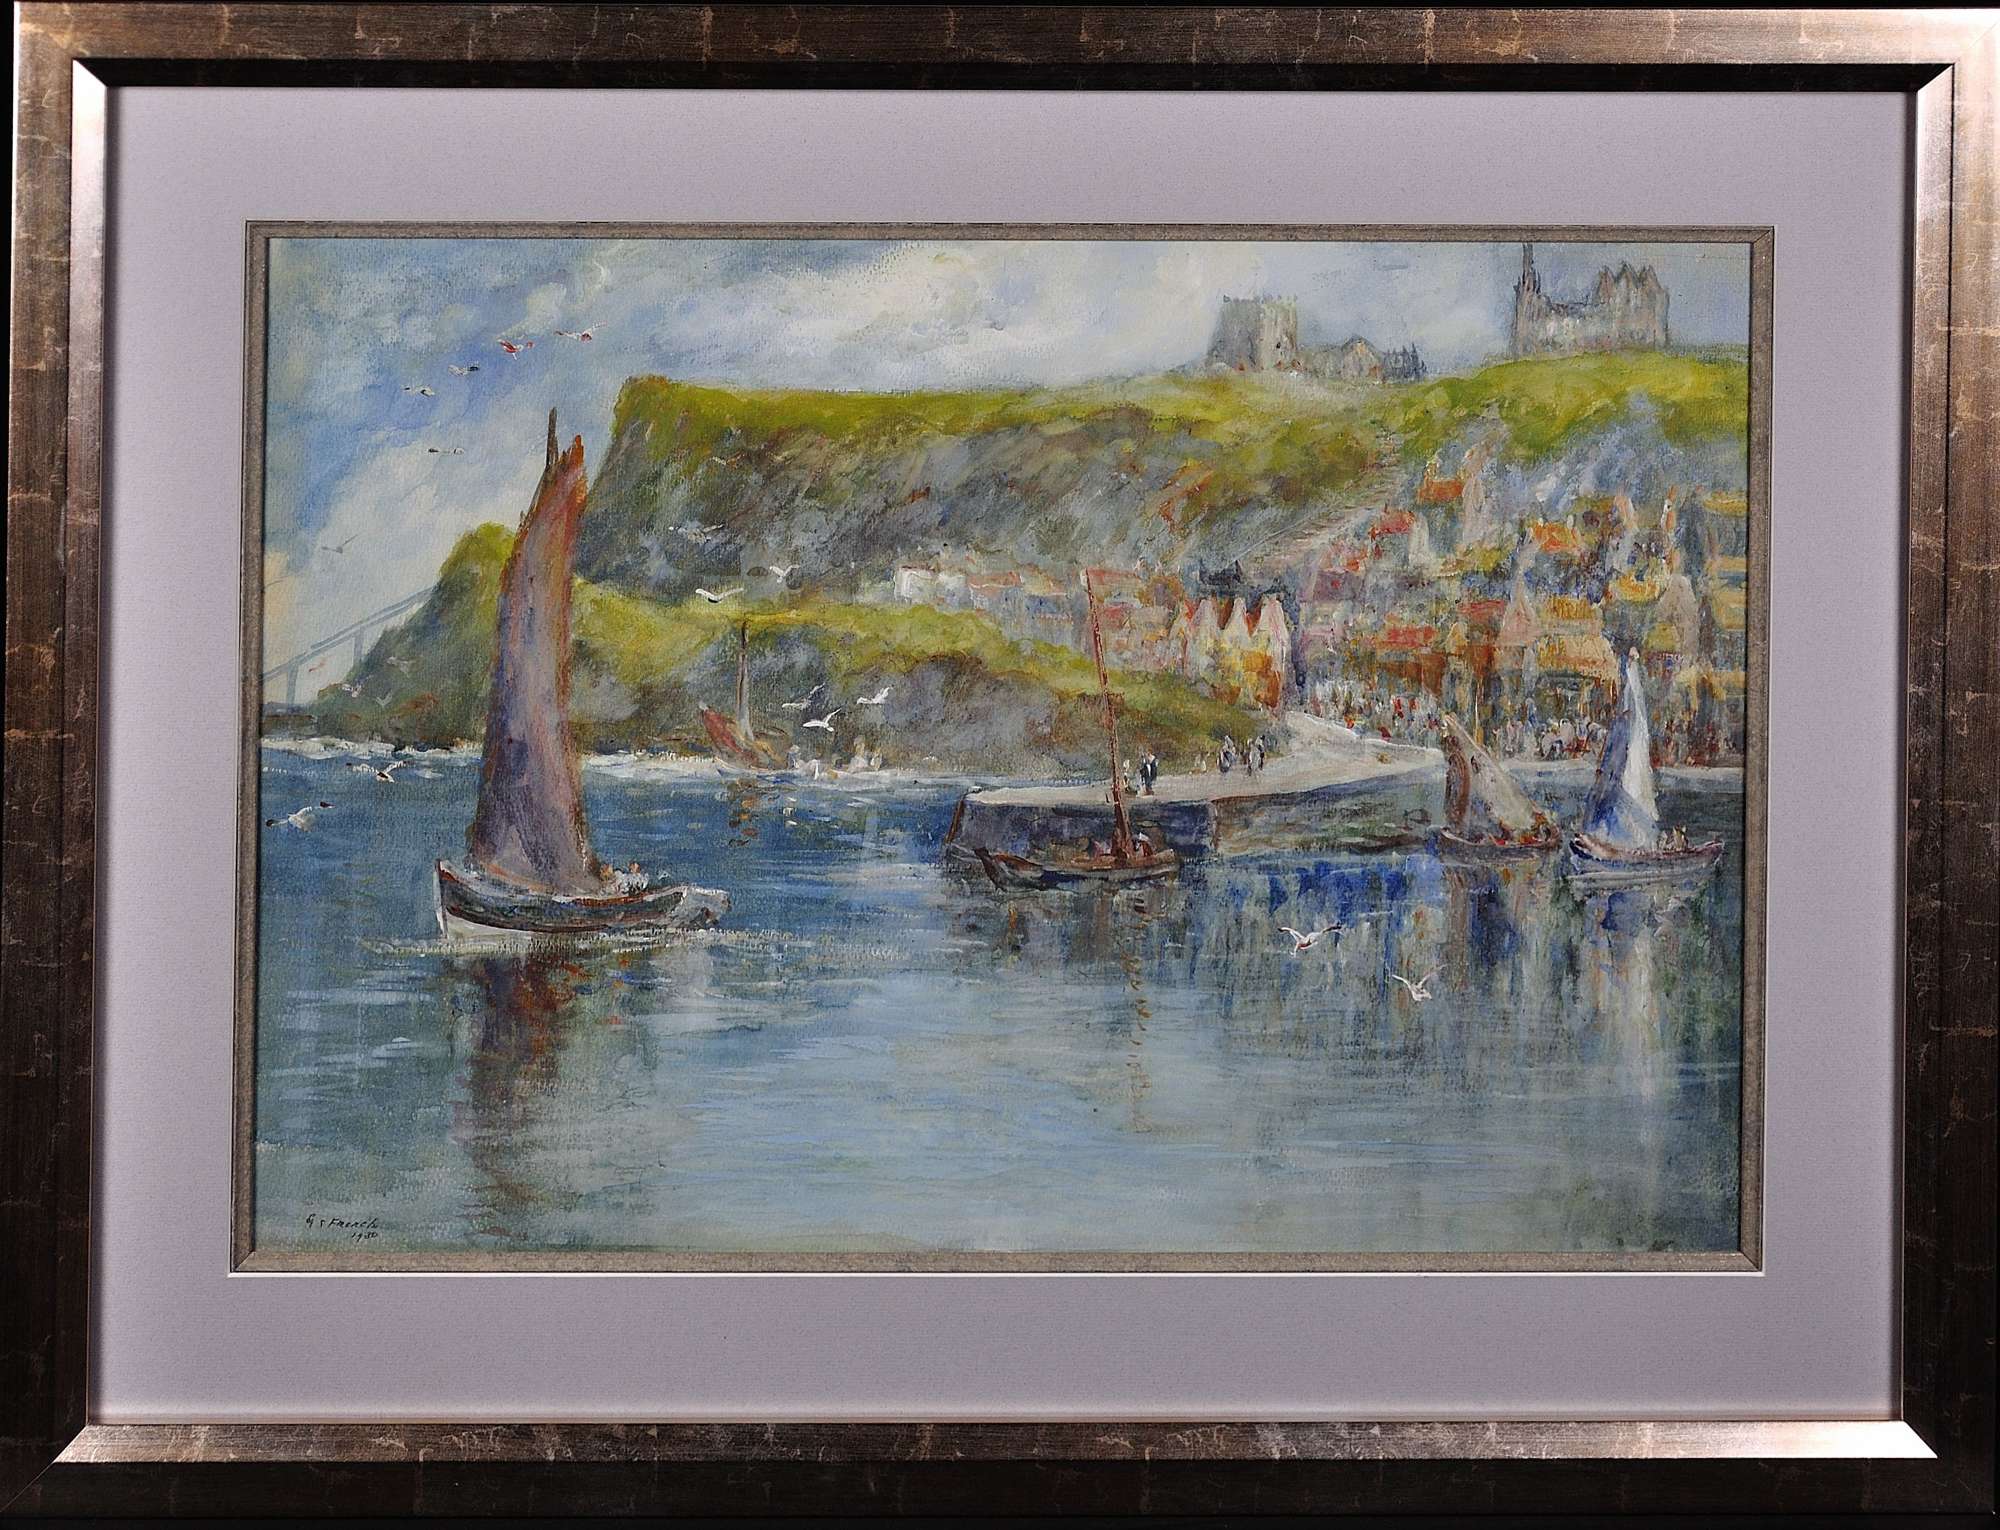 George Scarth French 1859-1946. Tate Hill Pier, Whitby,1930. Framed Watercolour.